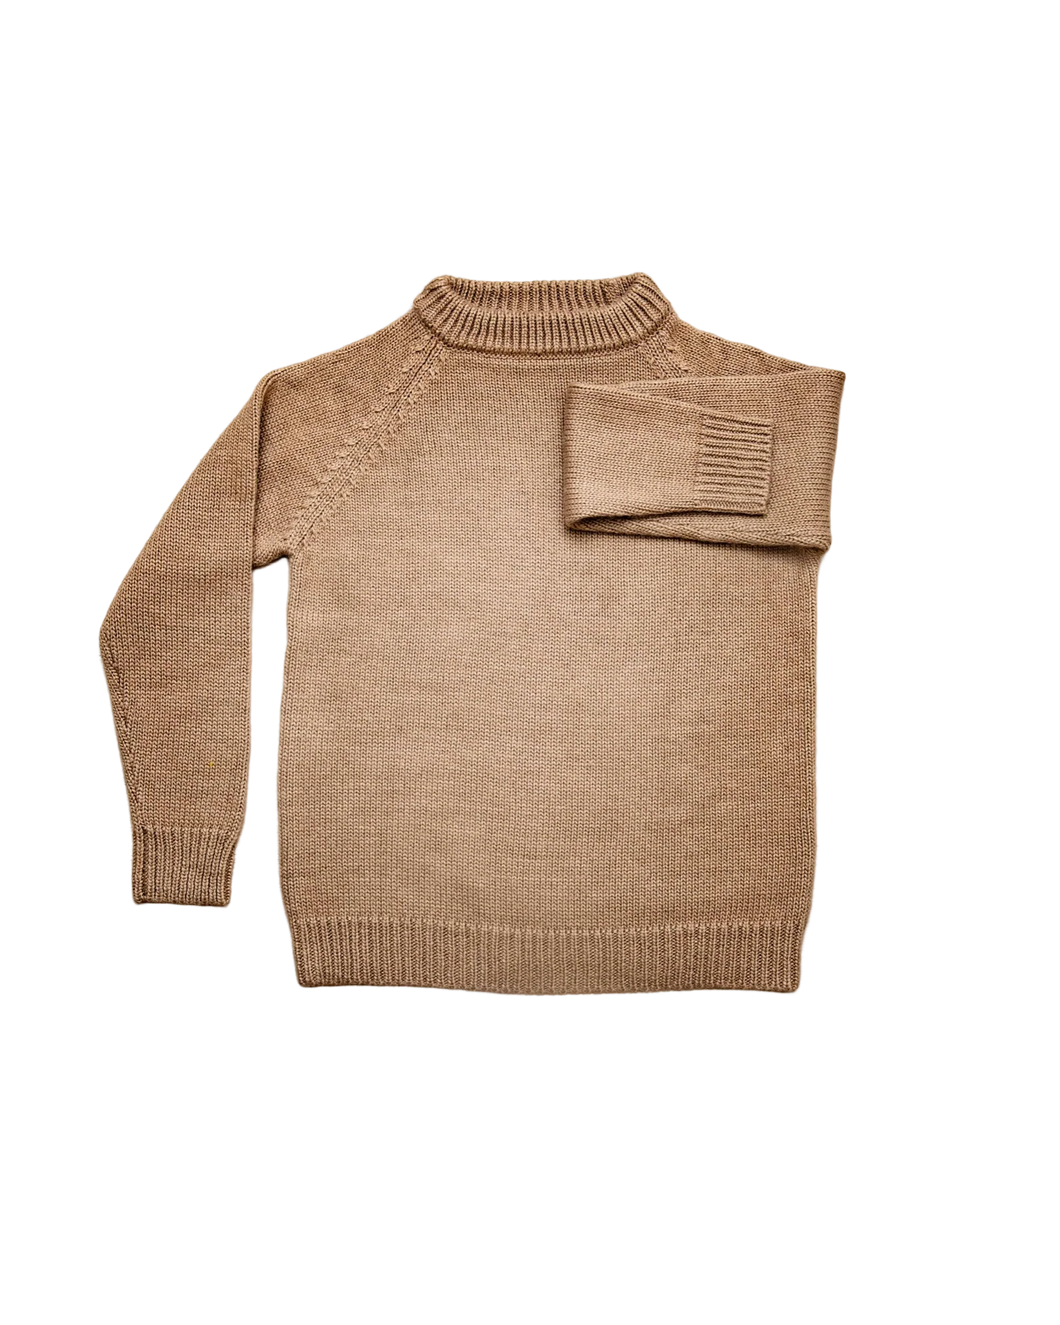 The 1924us Fishermans Sweater